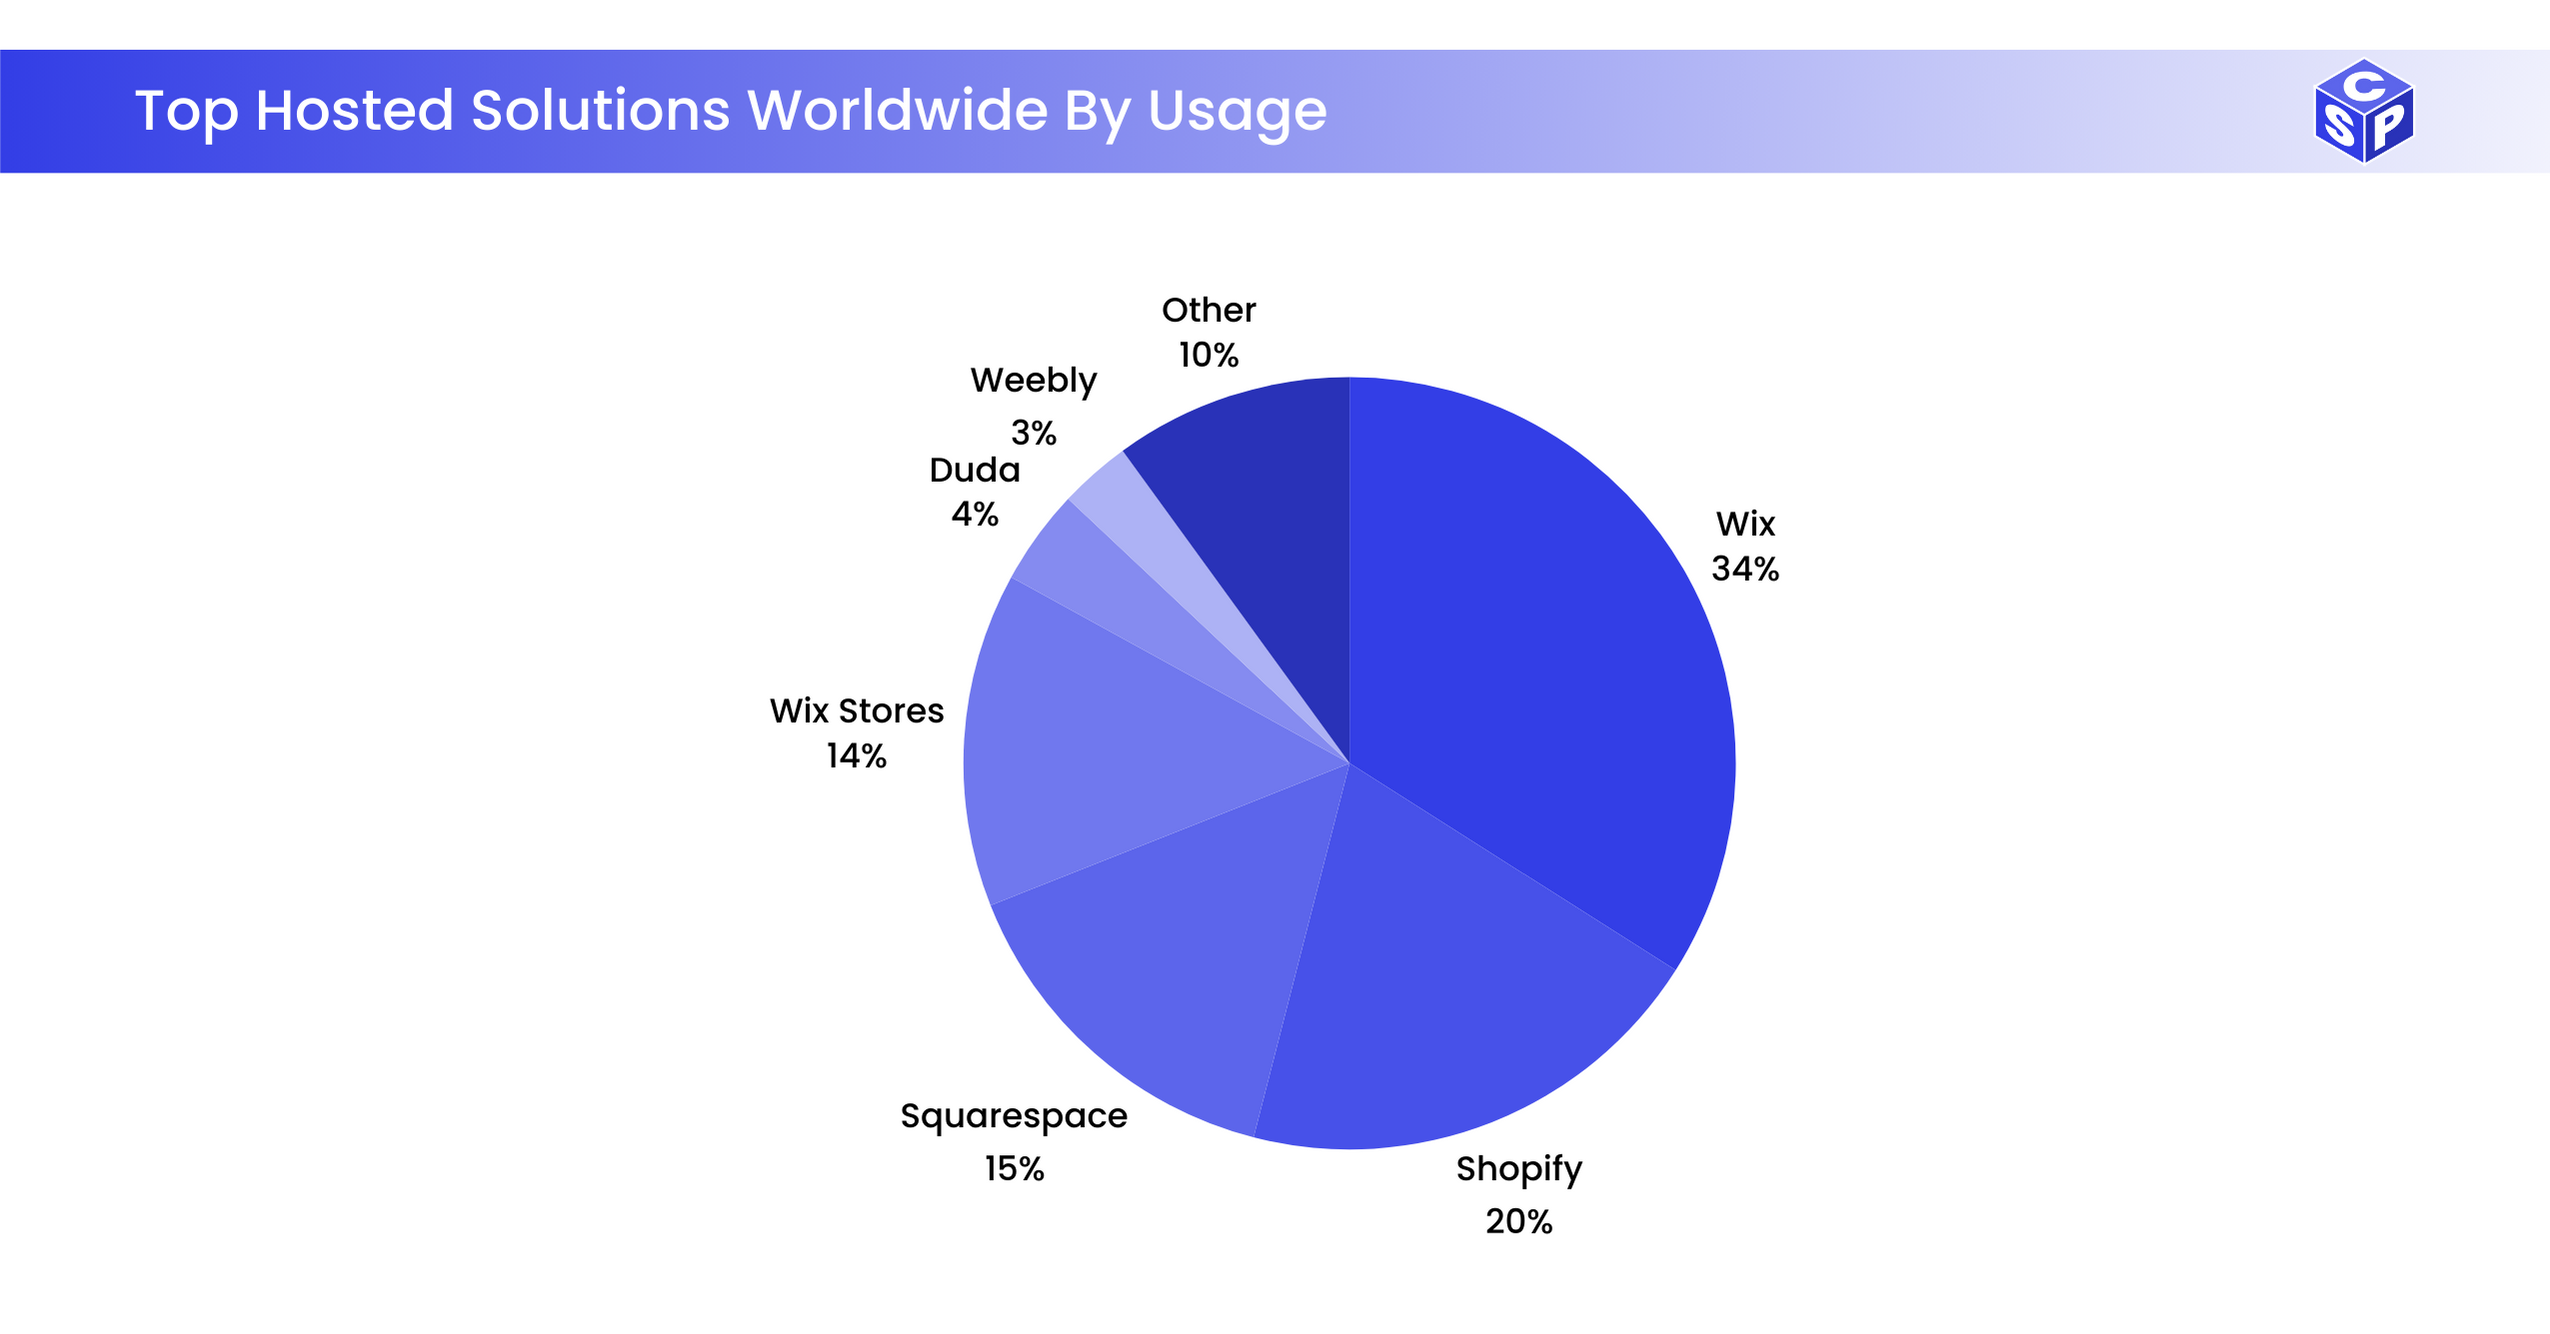 Top Hosted Solutions Worldwide By Usage